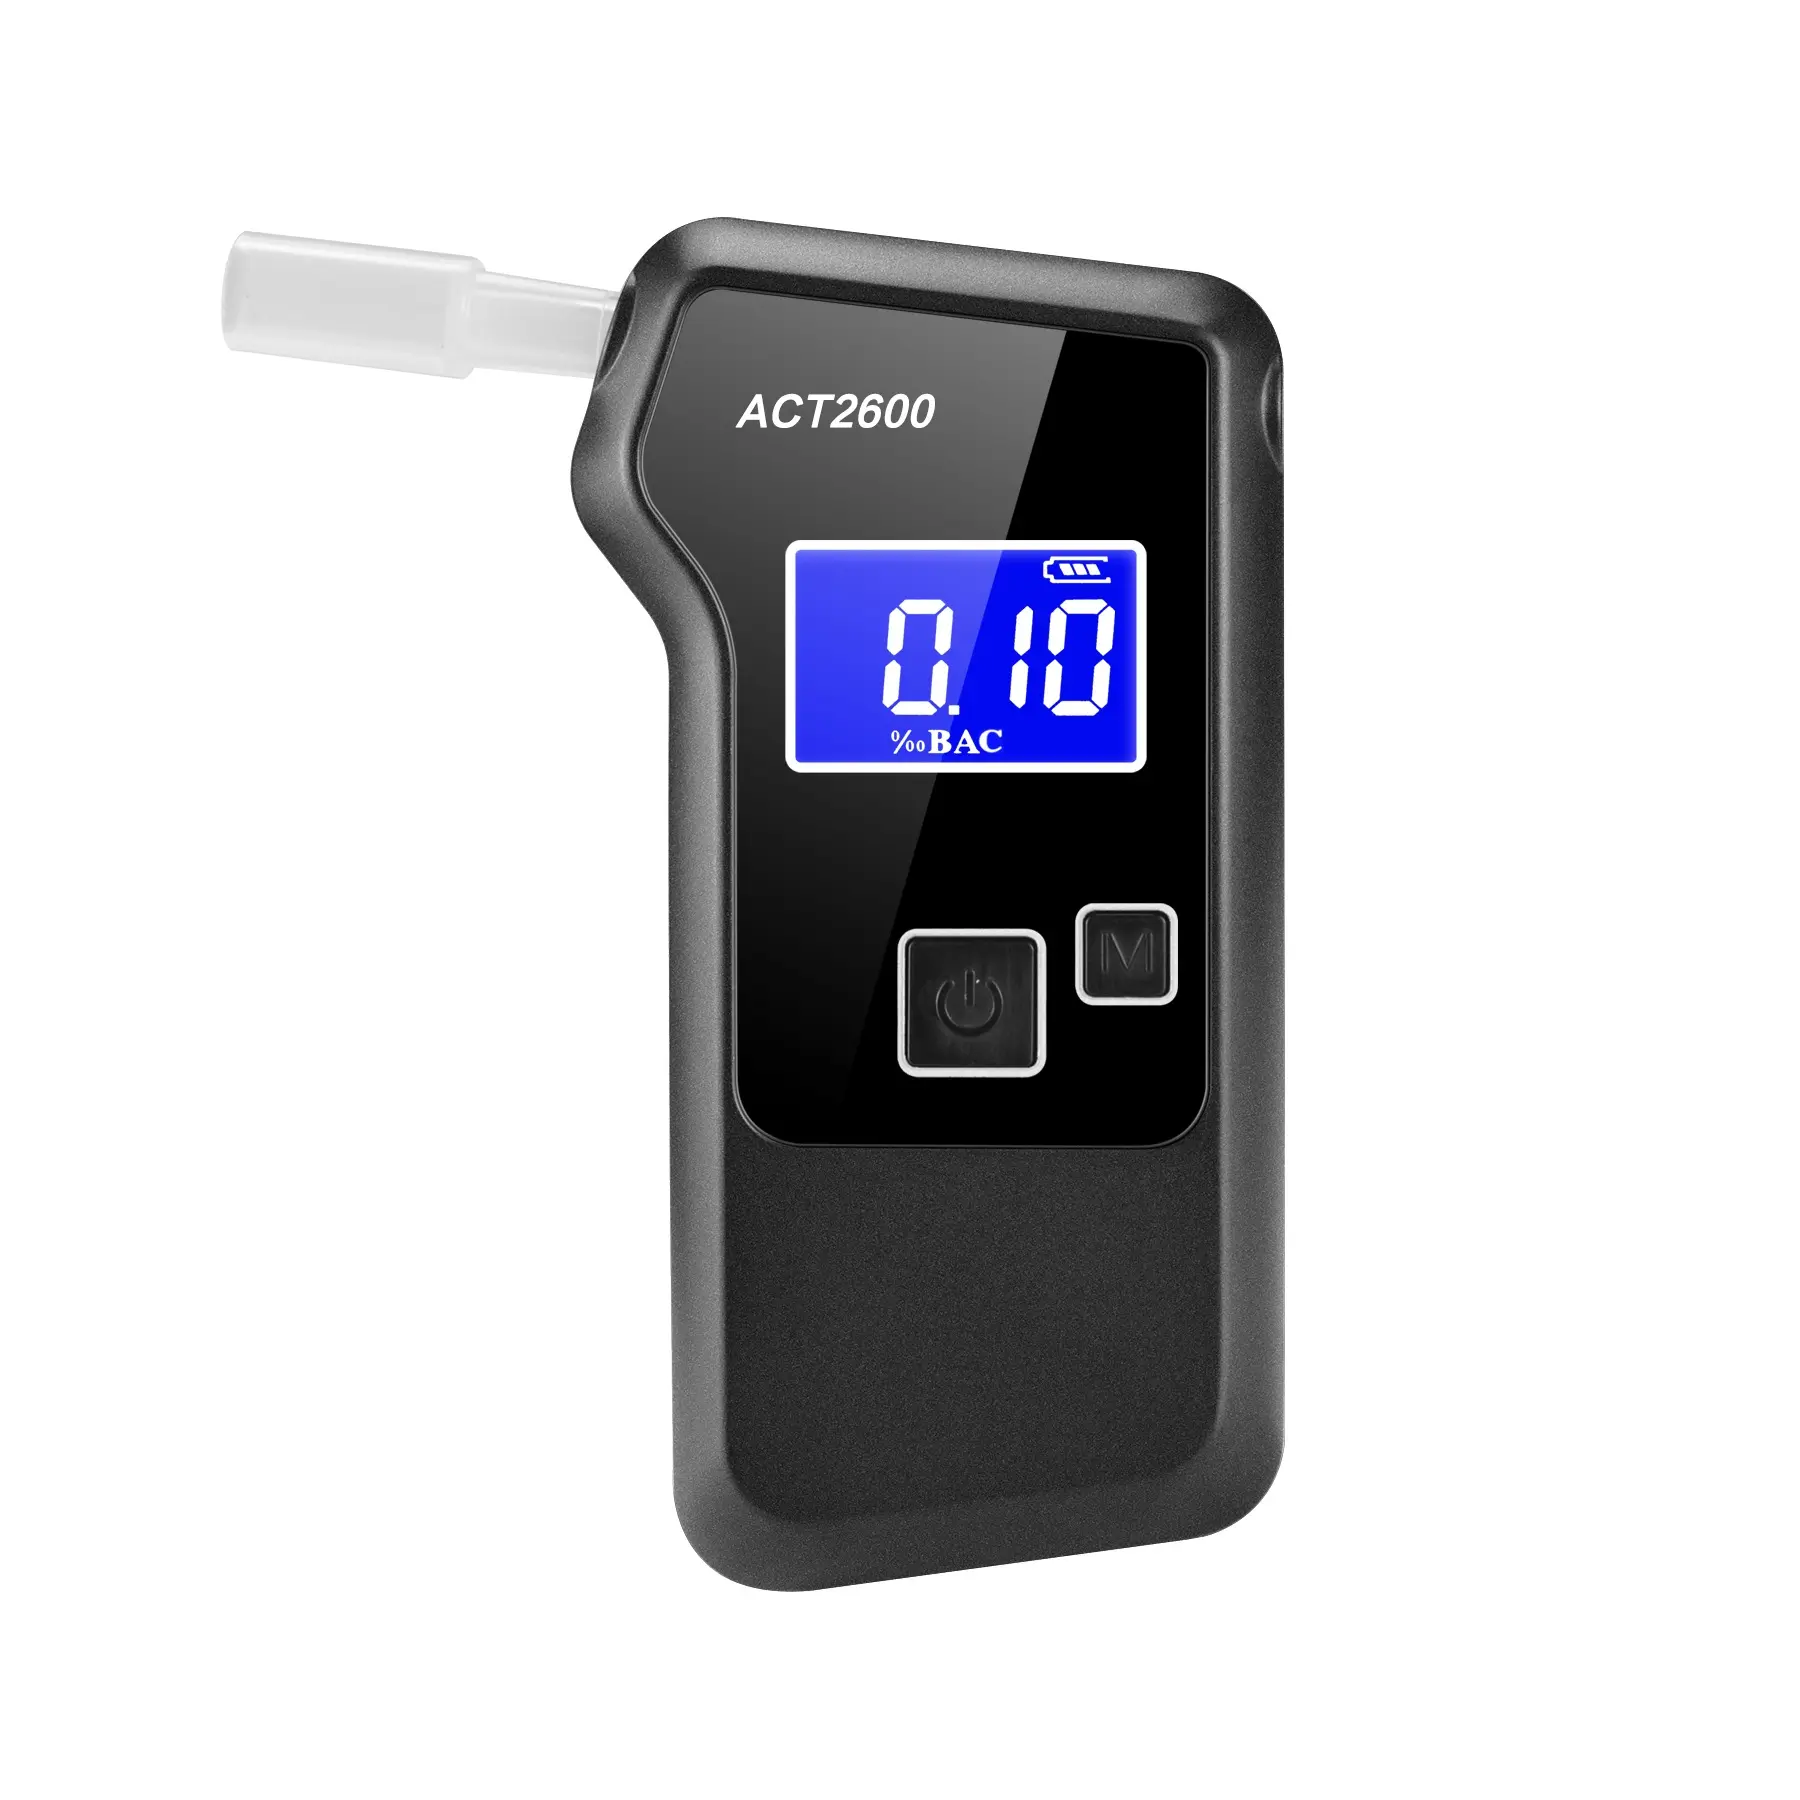 Cheap LCD digital display fuel cell alcohol tester